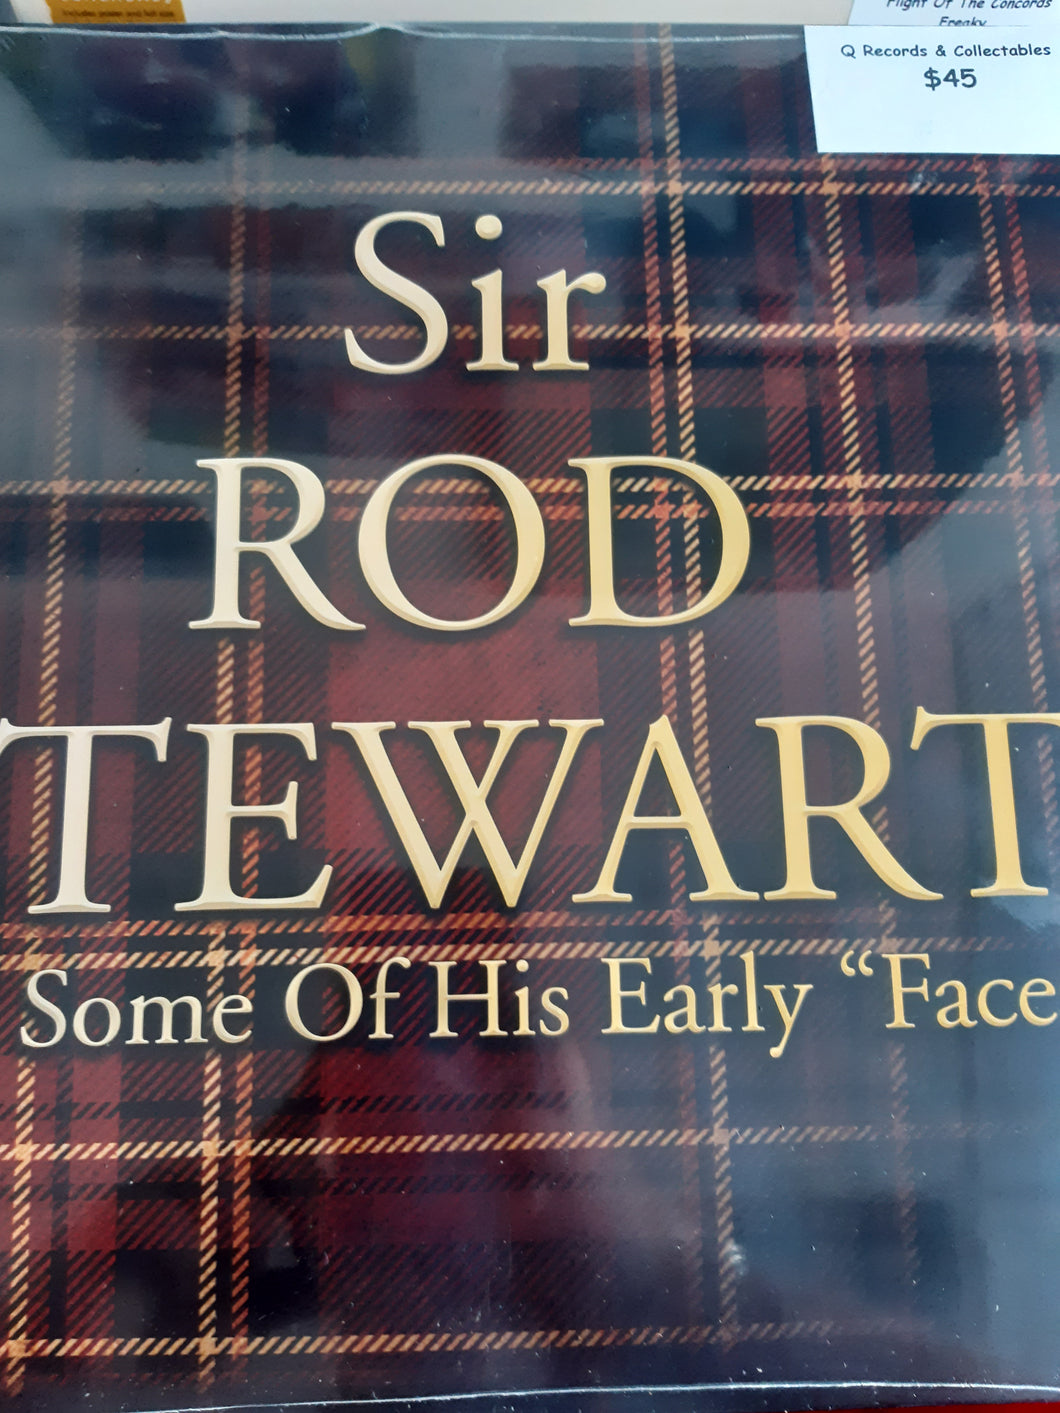 Rod Stewart - Best of Early Faces